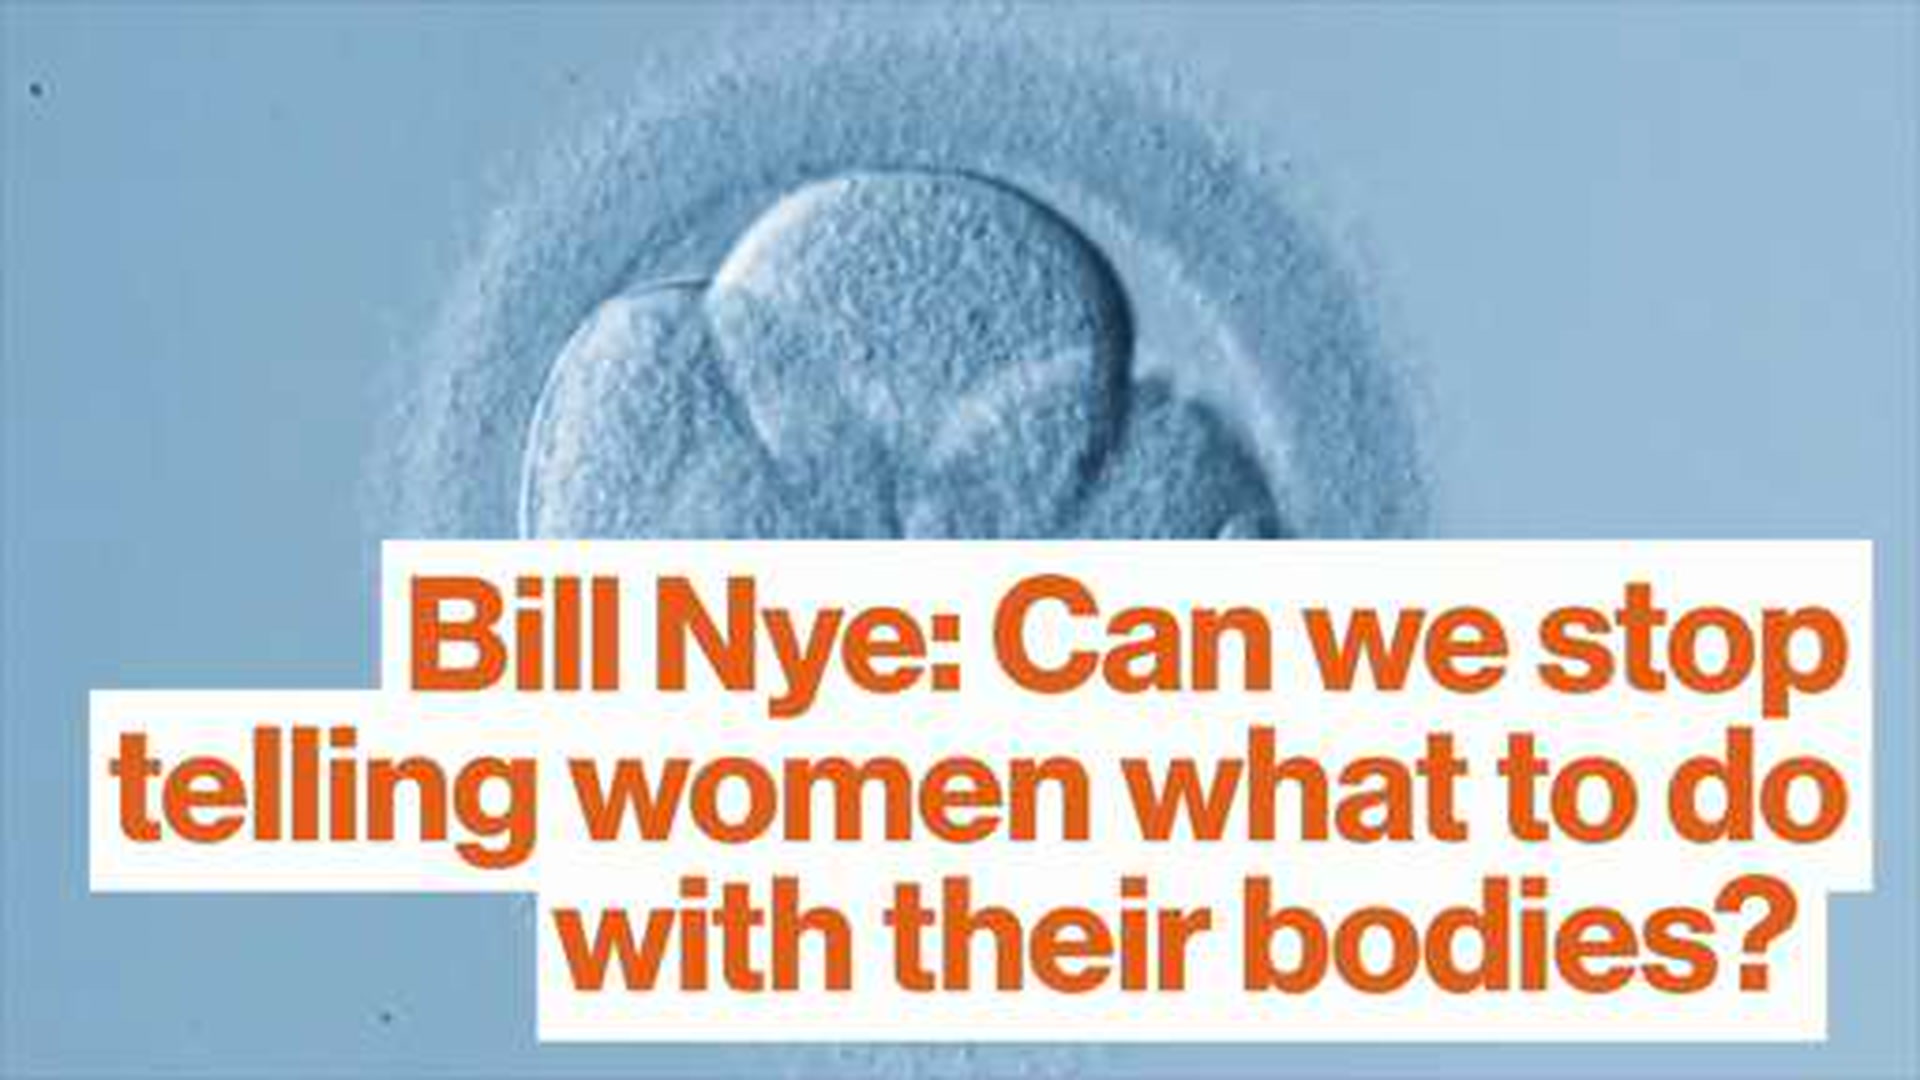 4 Arguments That Prevent Older Women Getting IVF – And Why They Are Deeply Flawed ...1920 x 1080